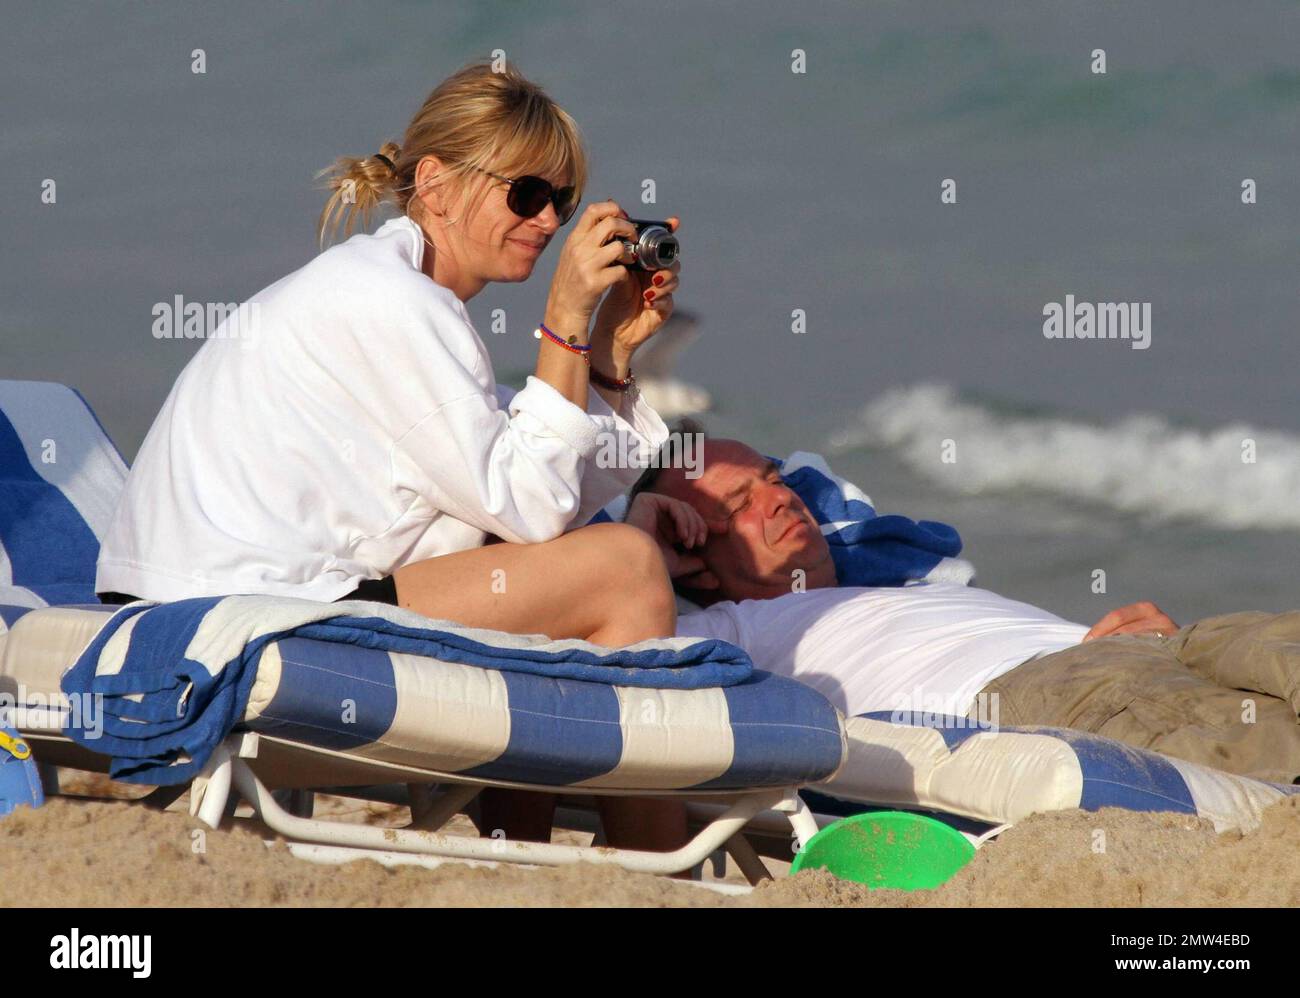 UK television personality Zoe Ball and husband Norman Cook (aka Fatboy Slim) enjoy an afternoon on the beach with their two children, Woody and Nelly. Father and son teamed up to dig a very deep hole in the sand and dad almost lost his pants getting out. Later, while Zoe was helping Woody climb out of the hole, Norman gave her a friendly shove into the hole. Miami Beach, FL. 1/4/11. Stock Photo